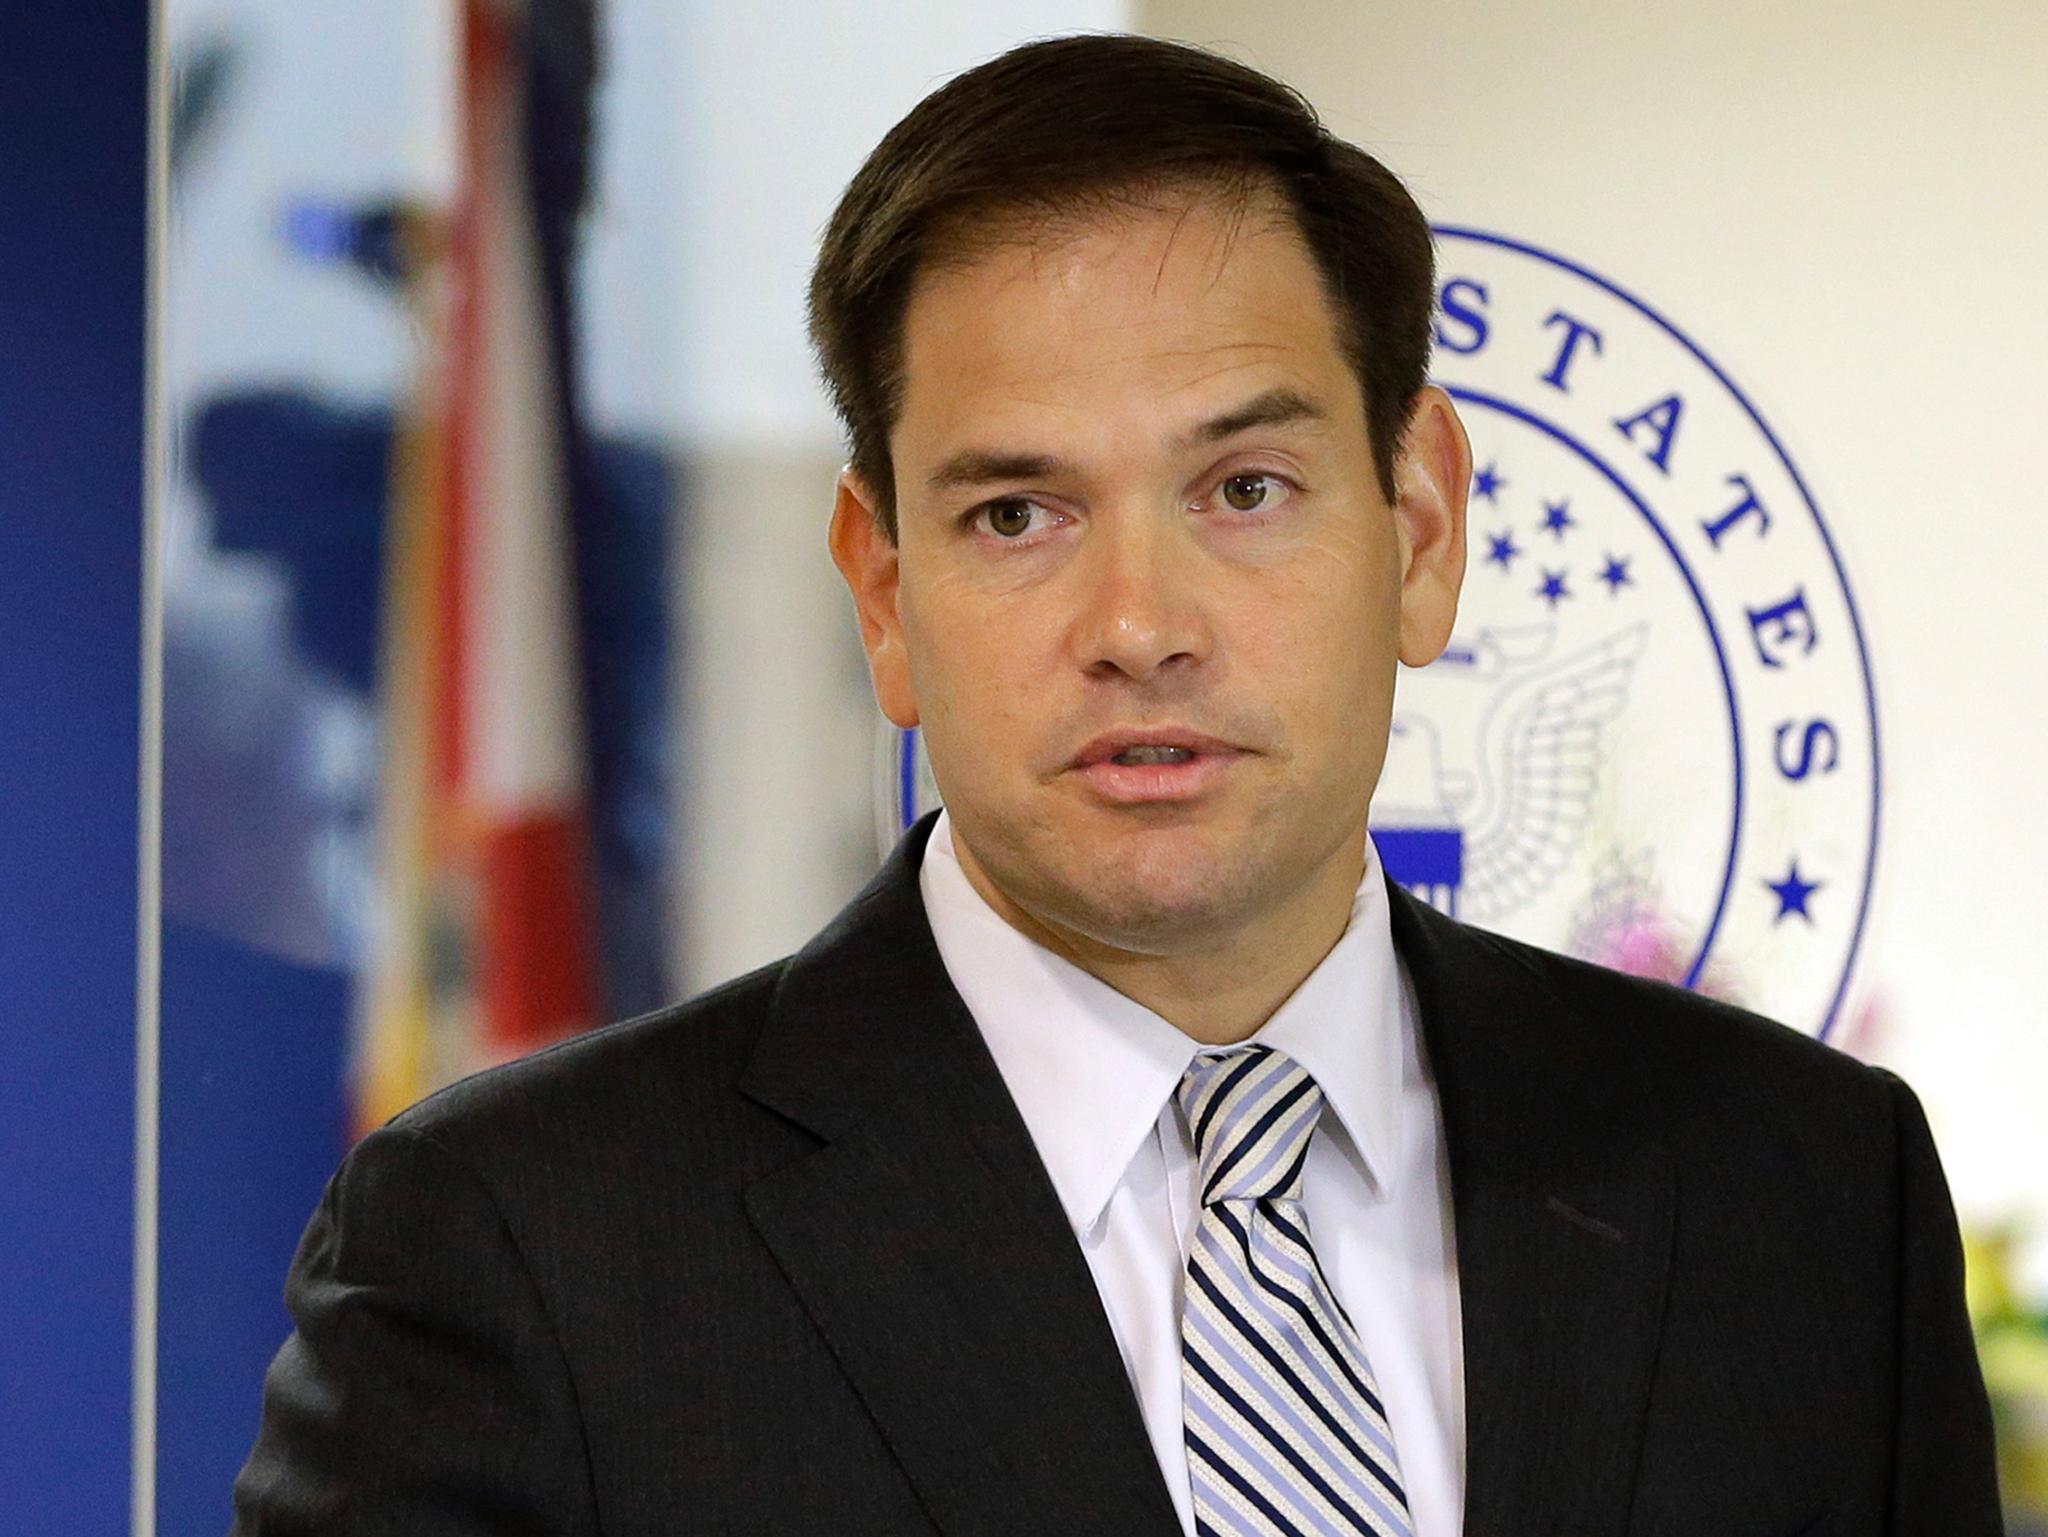 Marco Rubio had an unsuccessful bid to become the Republican presidential nominee